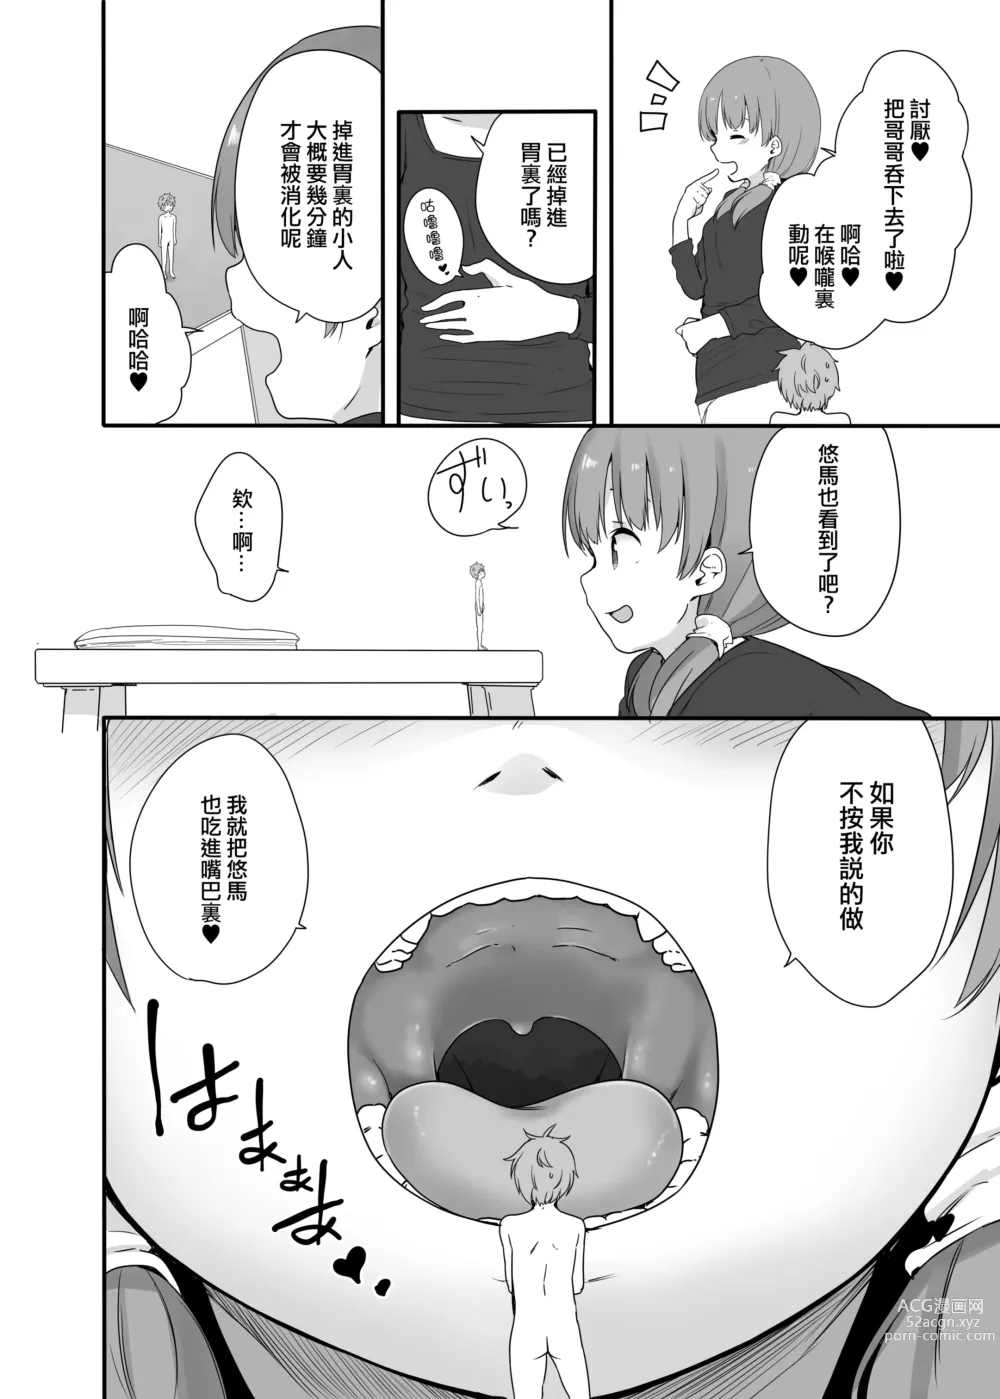 Page 9 of doujinshi Little Sister With Grande Everyday 3